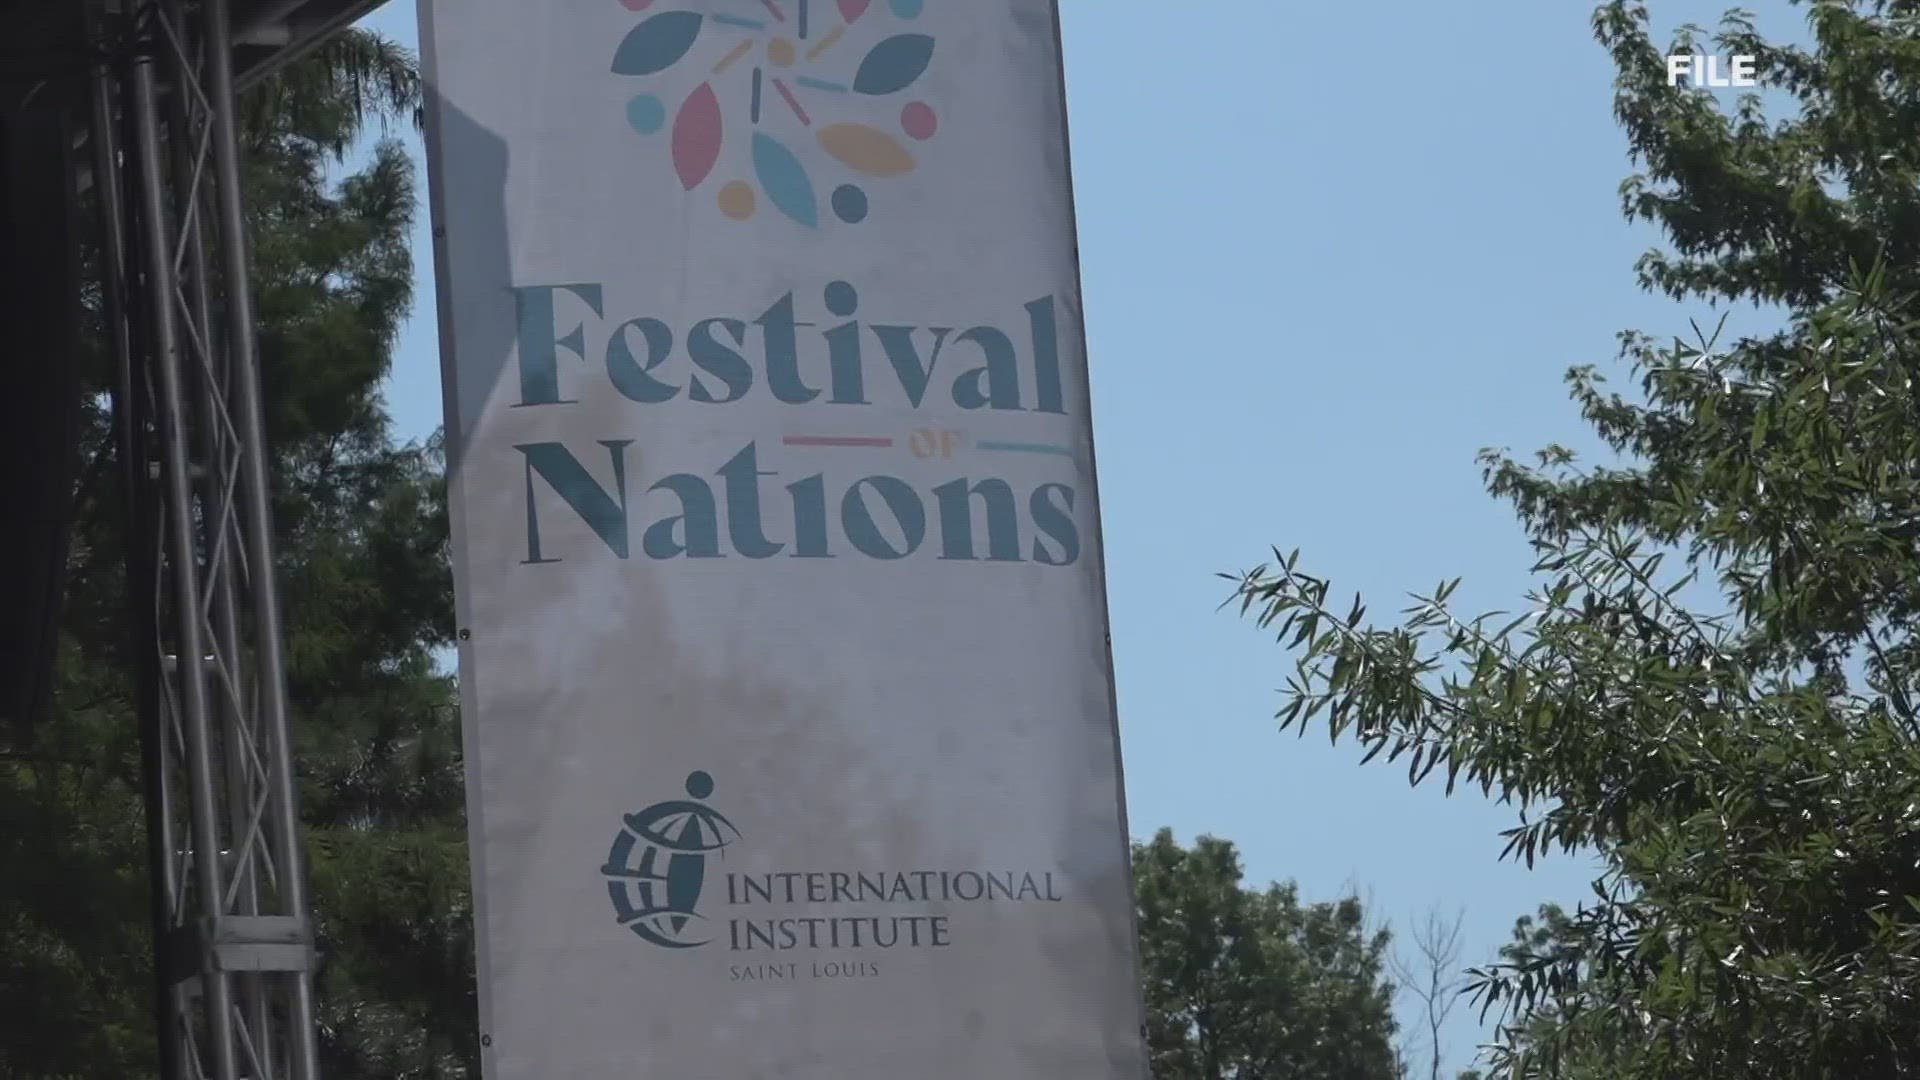 "At Festival of Nations, we bring cultures together, shine a light on our unique differences and embrace one another. This is our vision for St. Louis every day."